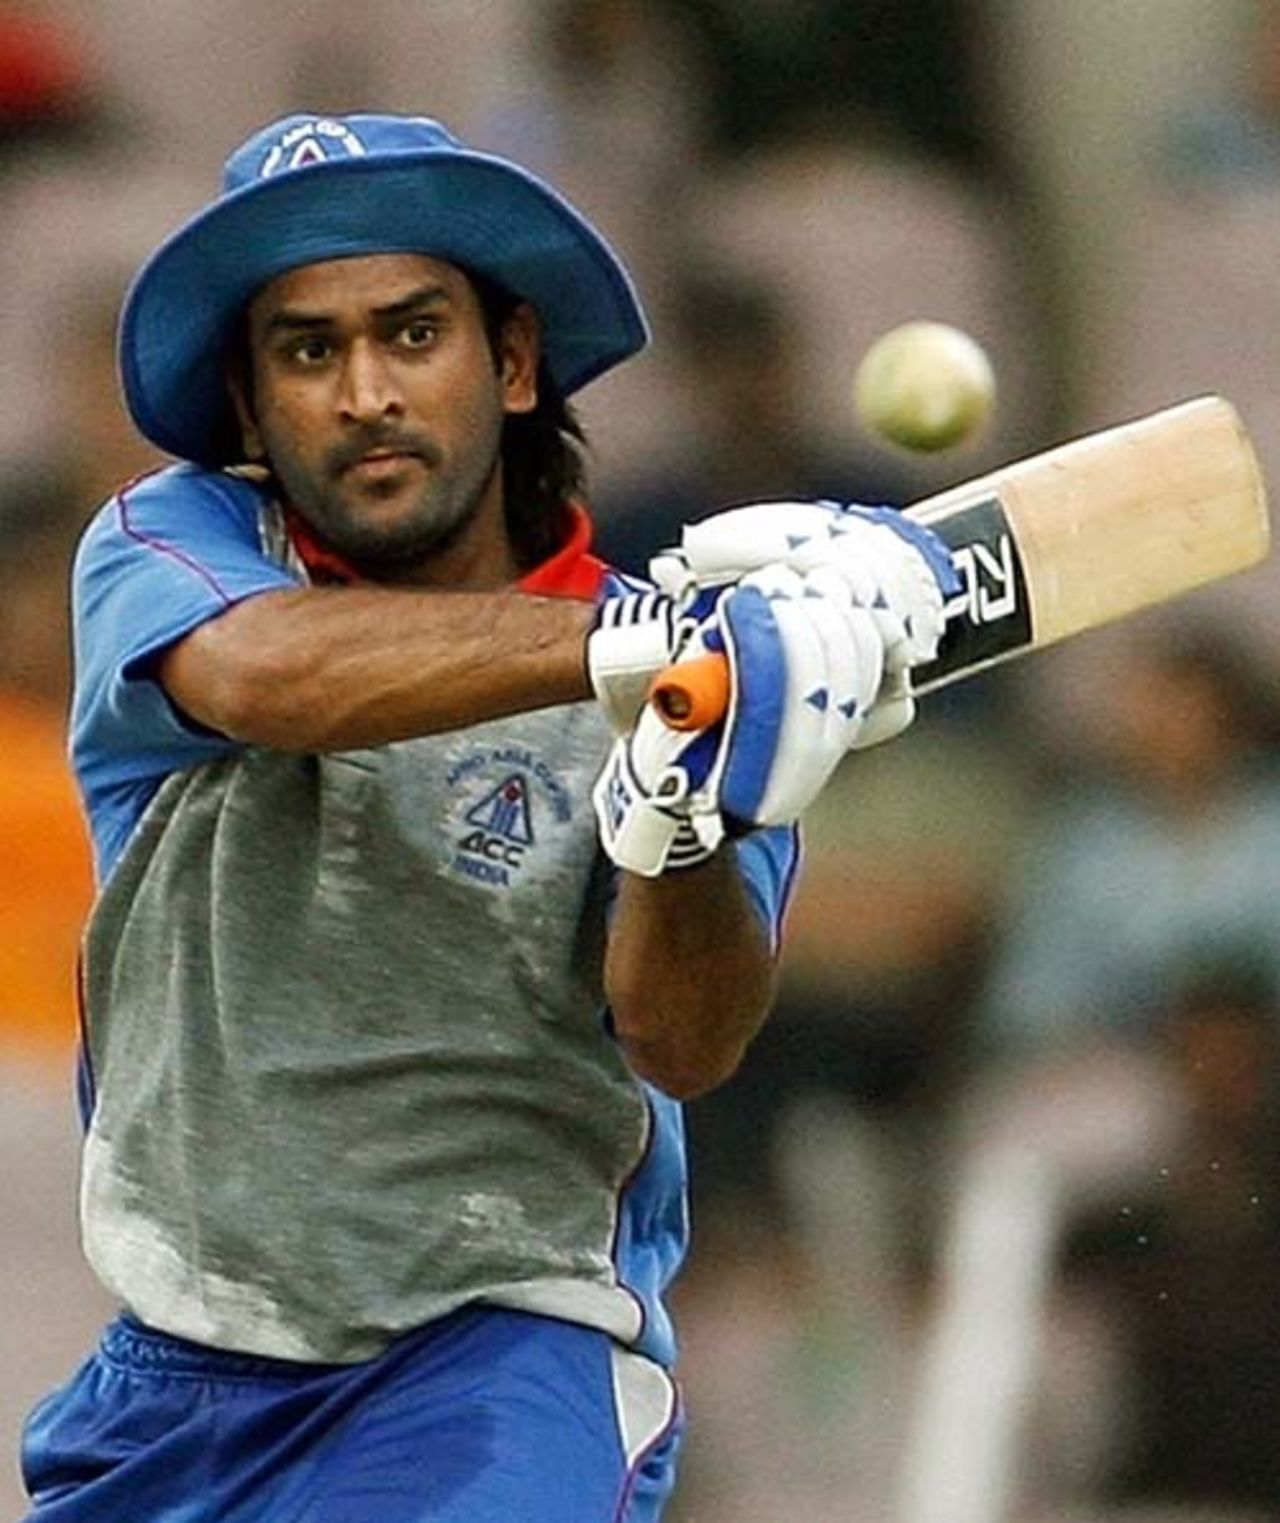 MS Dhoni nonchalantly pulls this one to the boundary during the third ODI of the Afro-Asia cup, Chennai, June 10, 2007